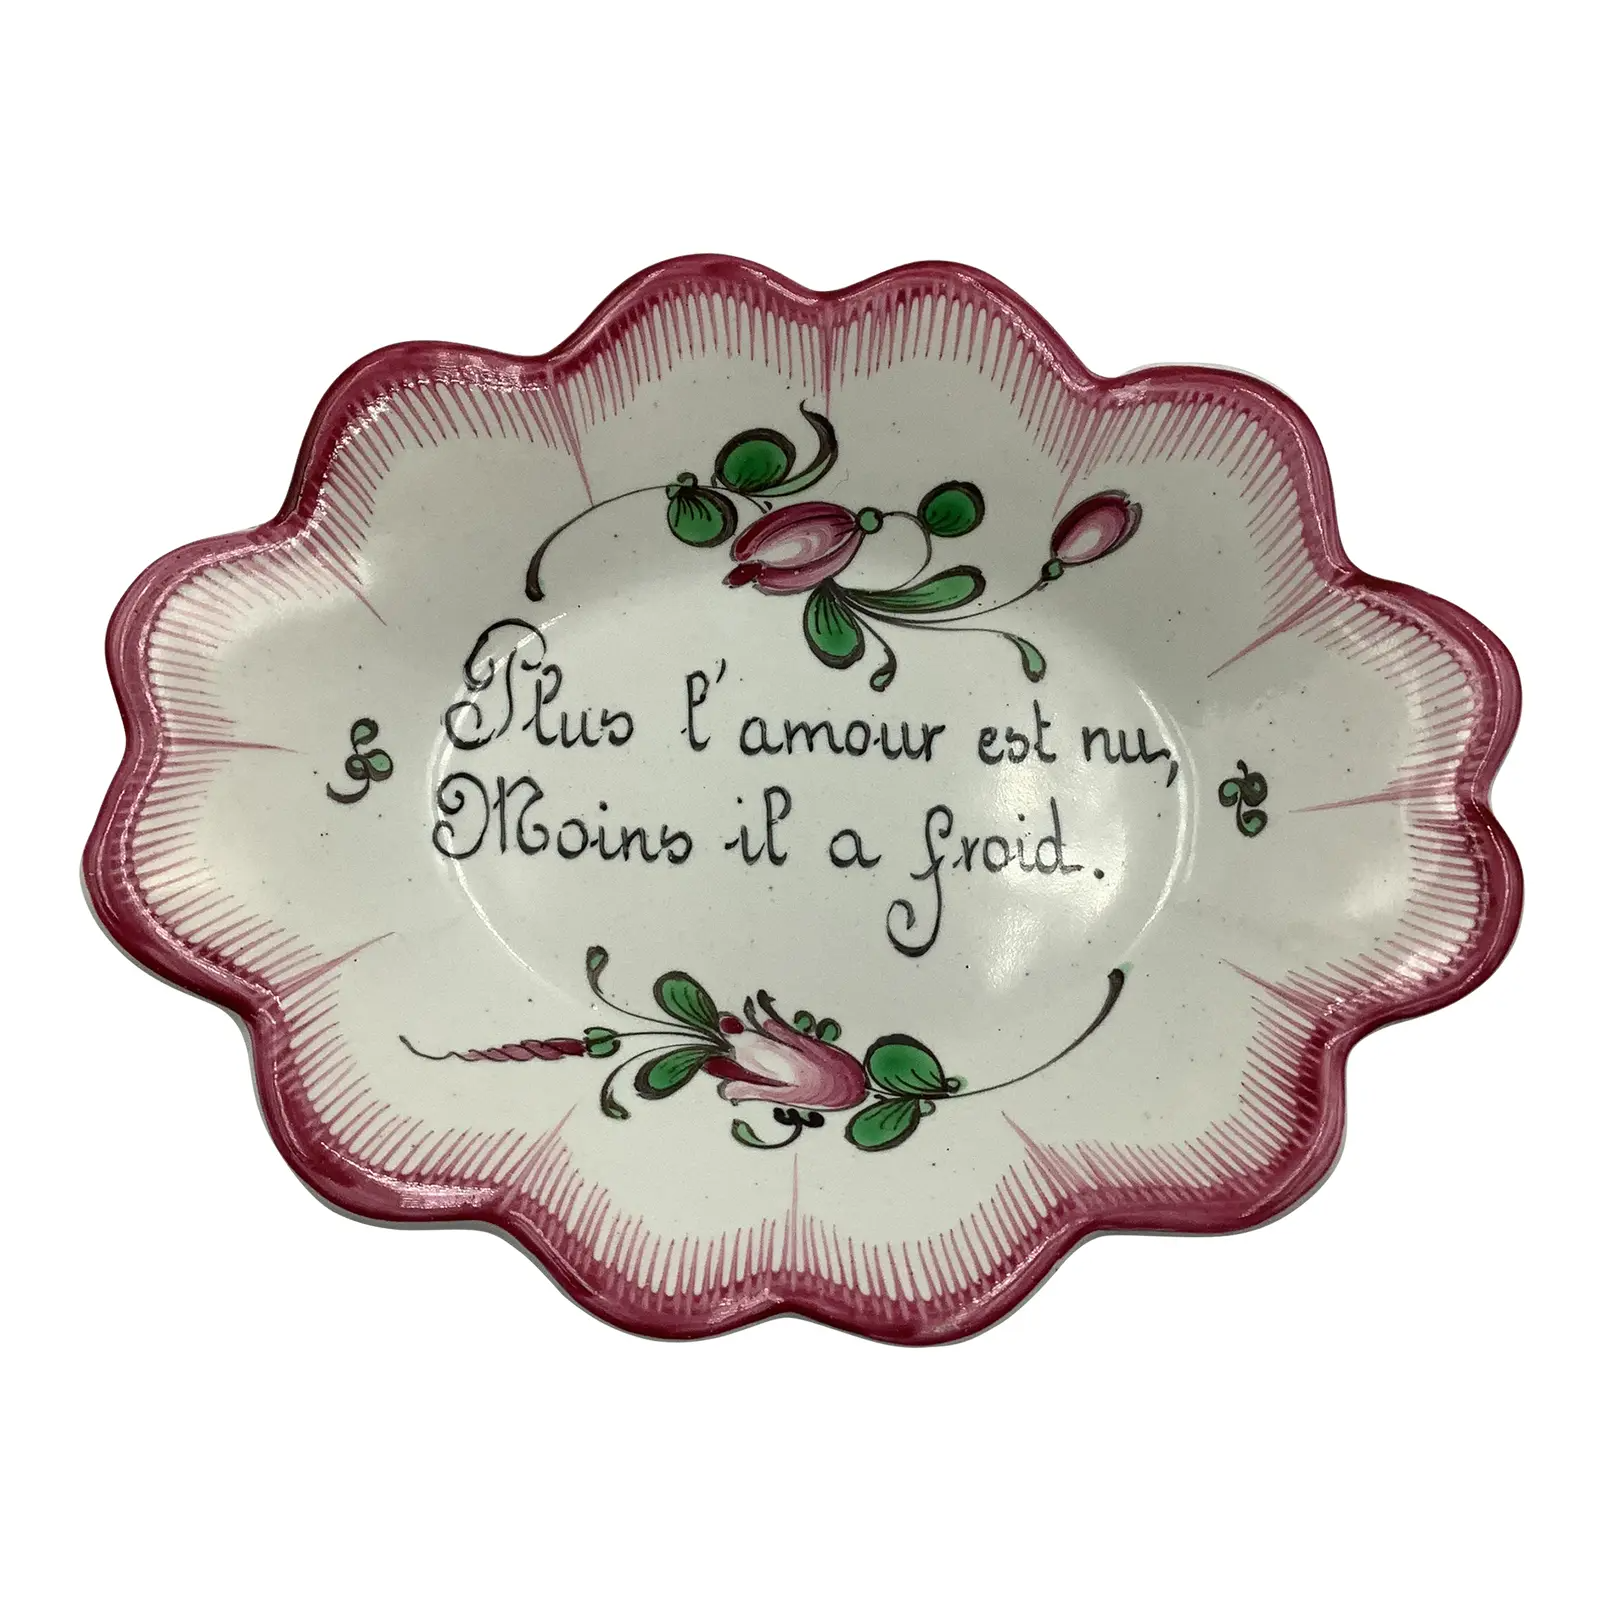 Vintage French Ceramic Scalloped Hand Painted Phrase Catchall Decorative Dish